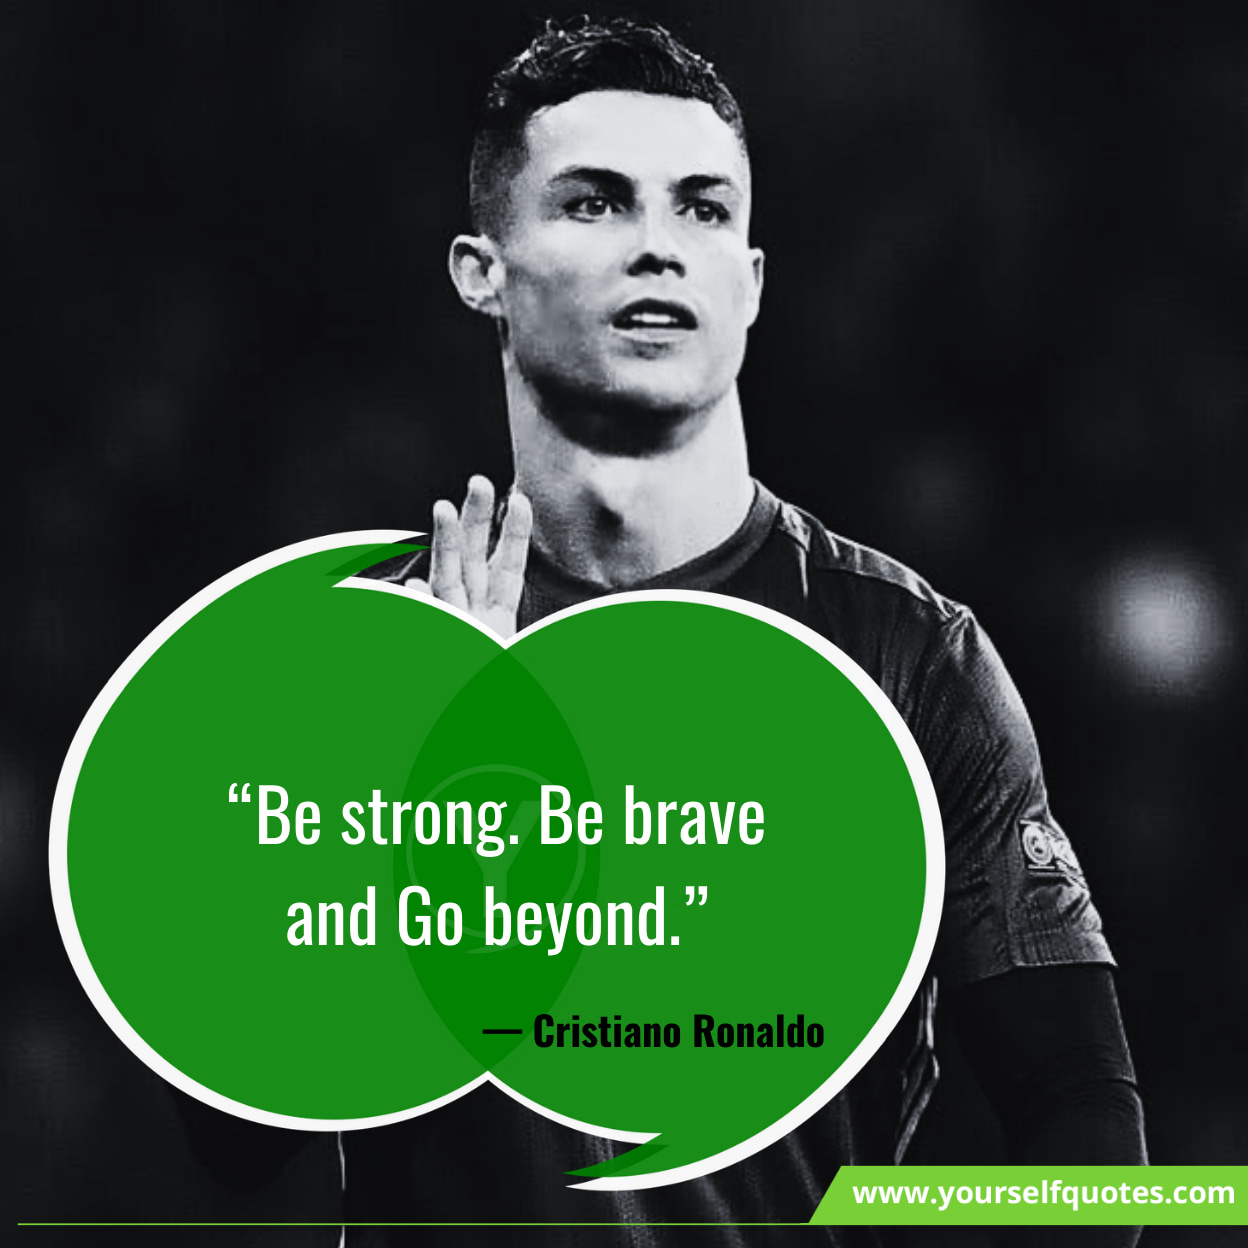 85 Cristiano Ronaldo Quotes That Will Make You Better